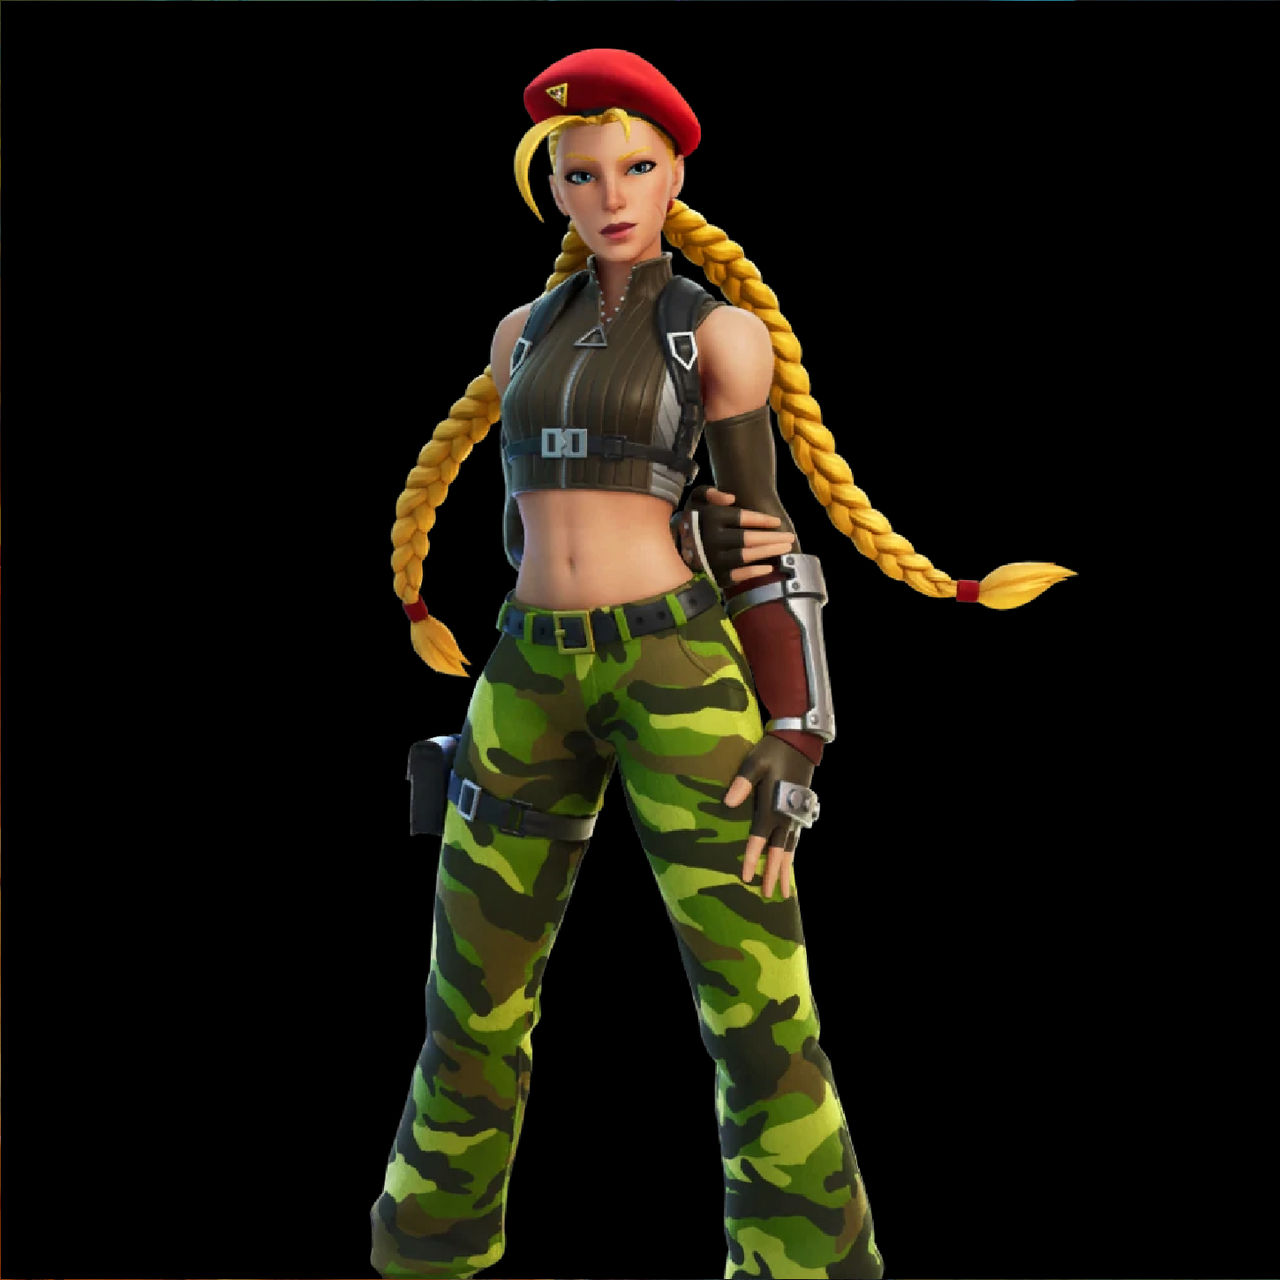 Fortnite: Tactical Cammy. by Venom-Rules-all on DeviantArt